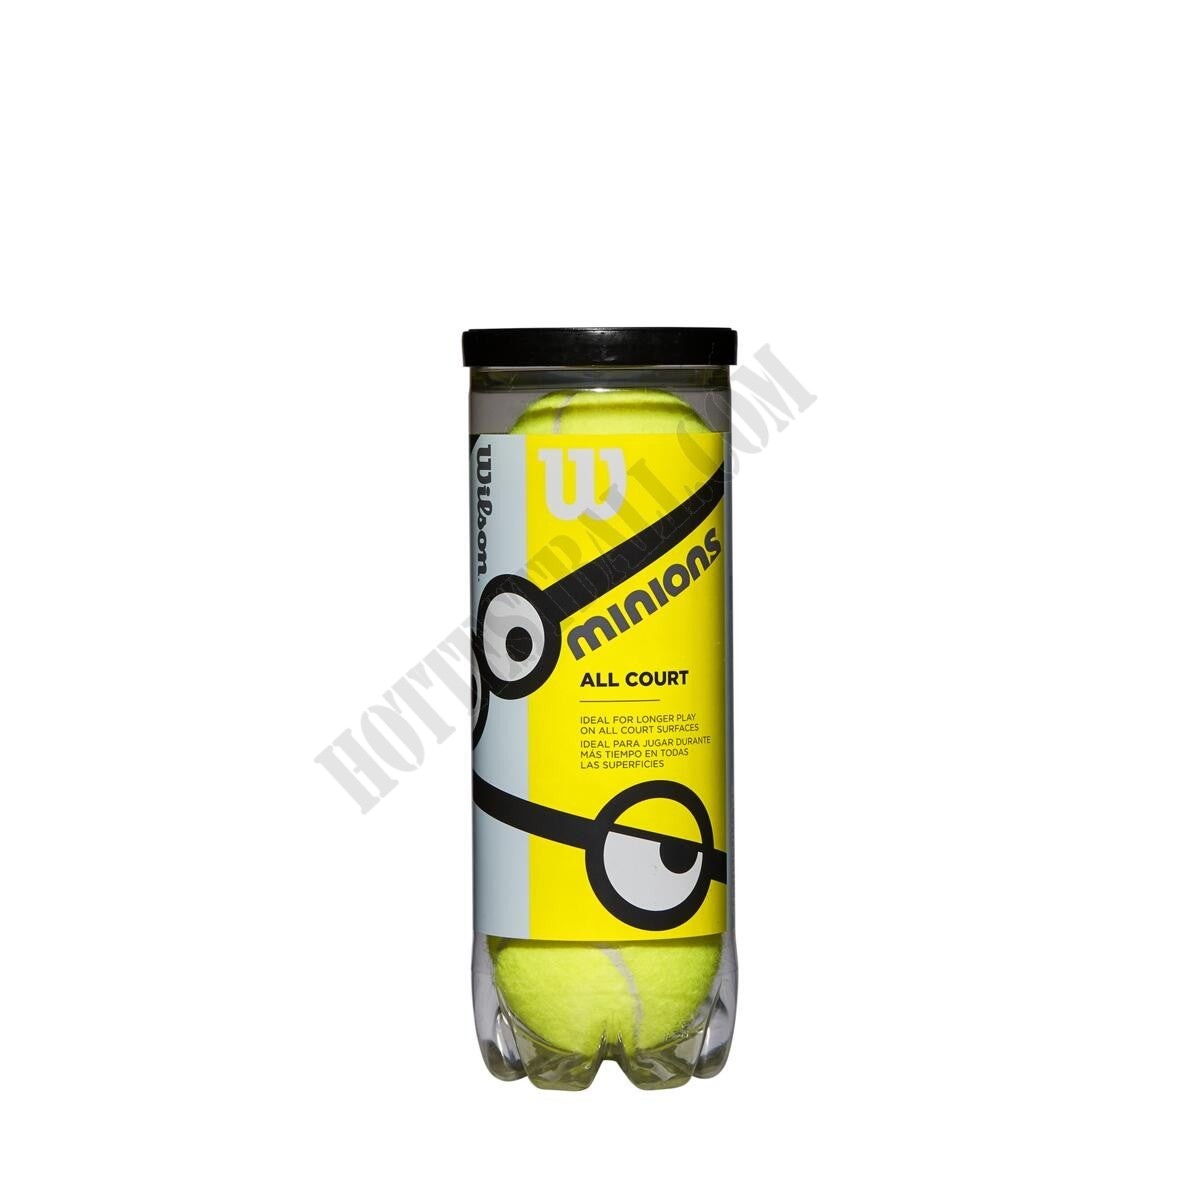 Minions Stage 1 Tennis BCan - Wilson Discount Store - -0